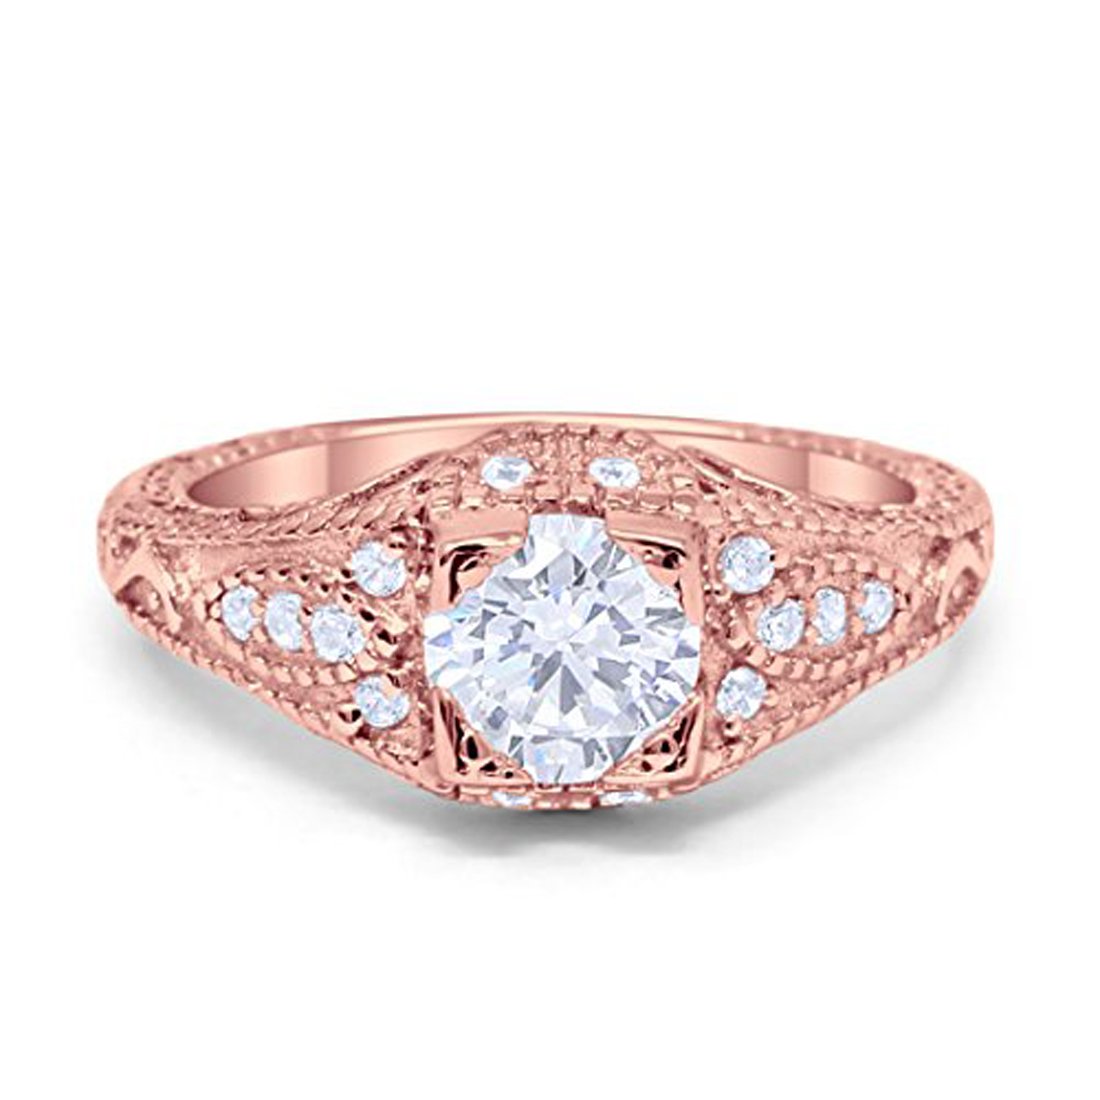 Vintage Design Solitaire Wedding Ring Rose Tone, Simulated CZ 925 Sterling Silver